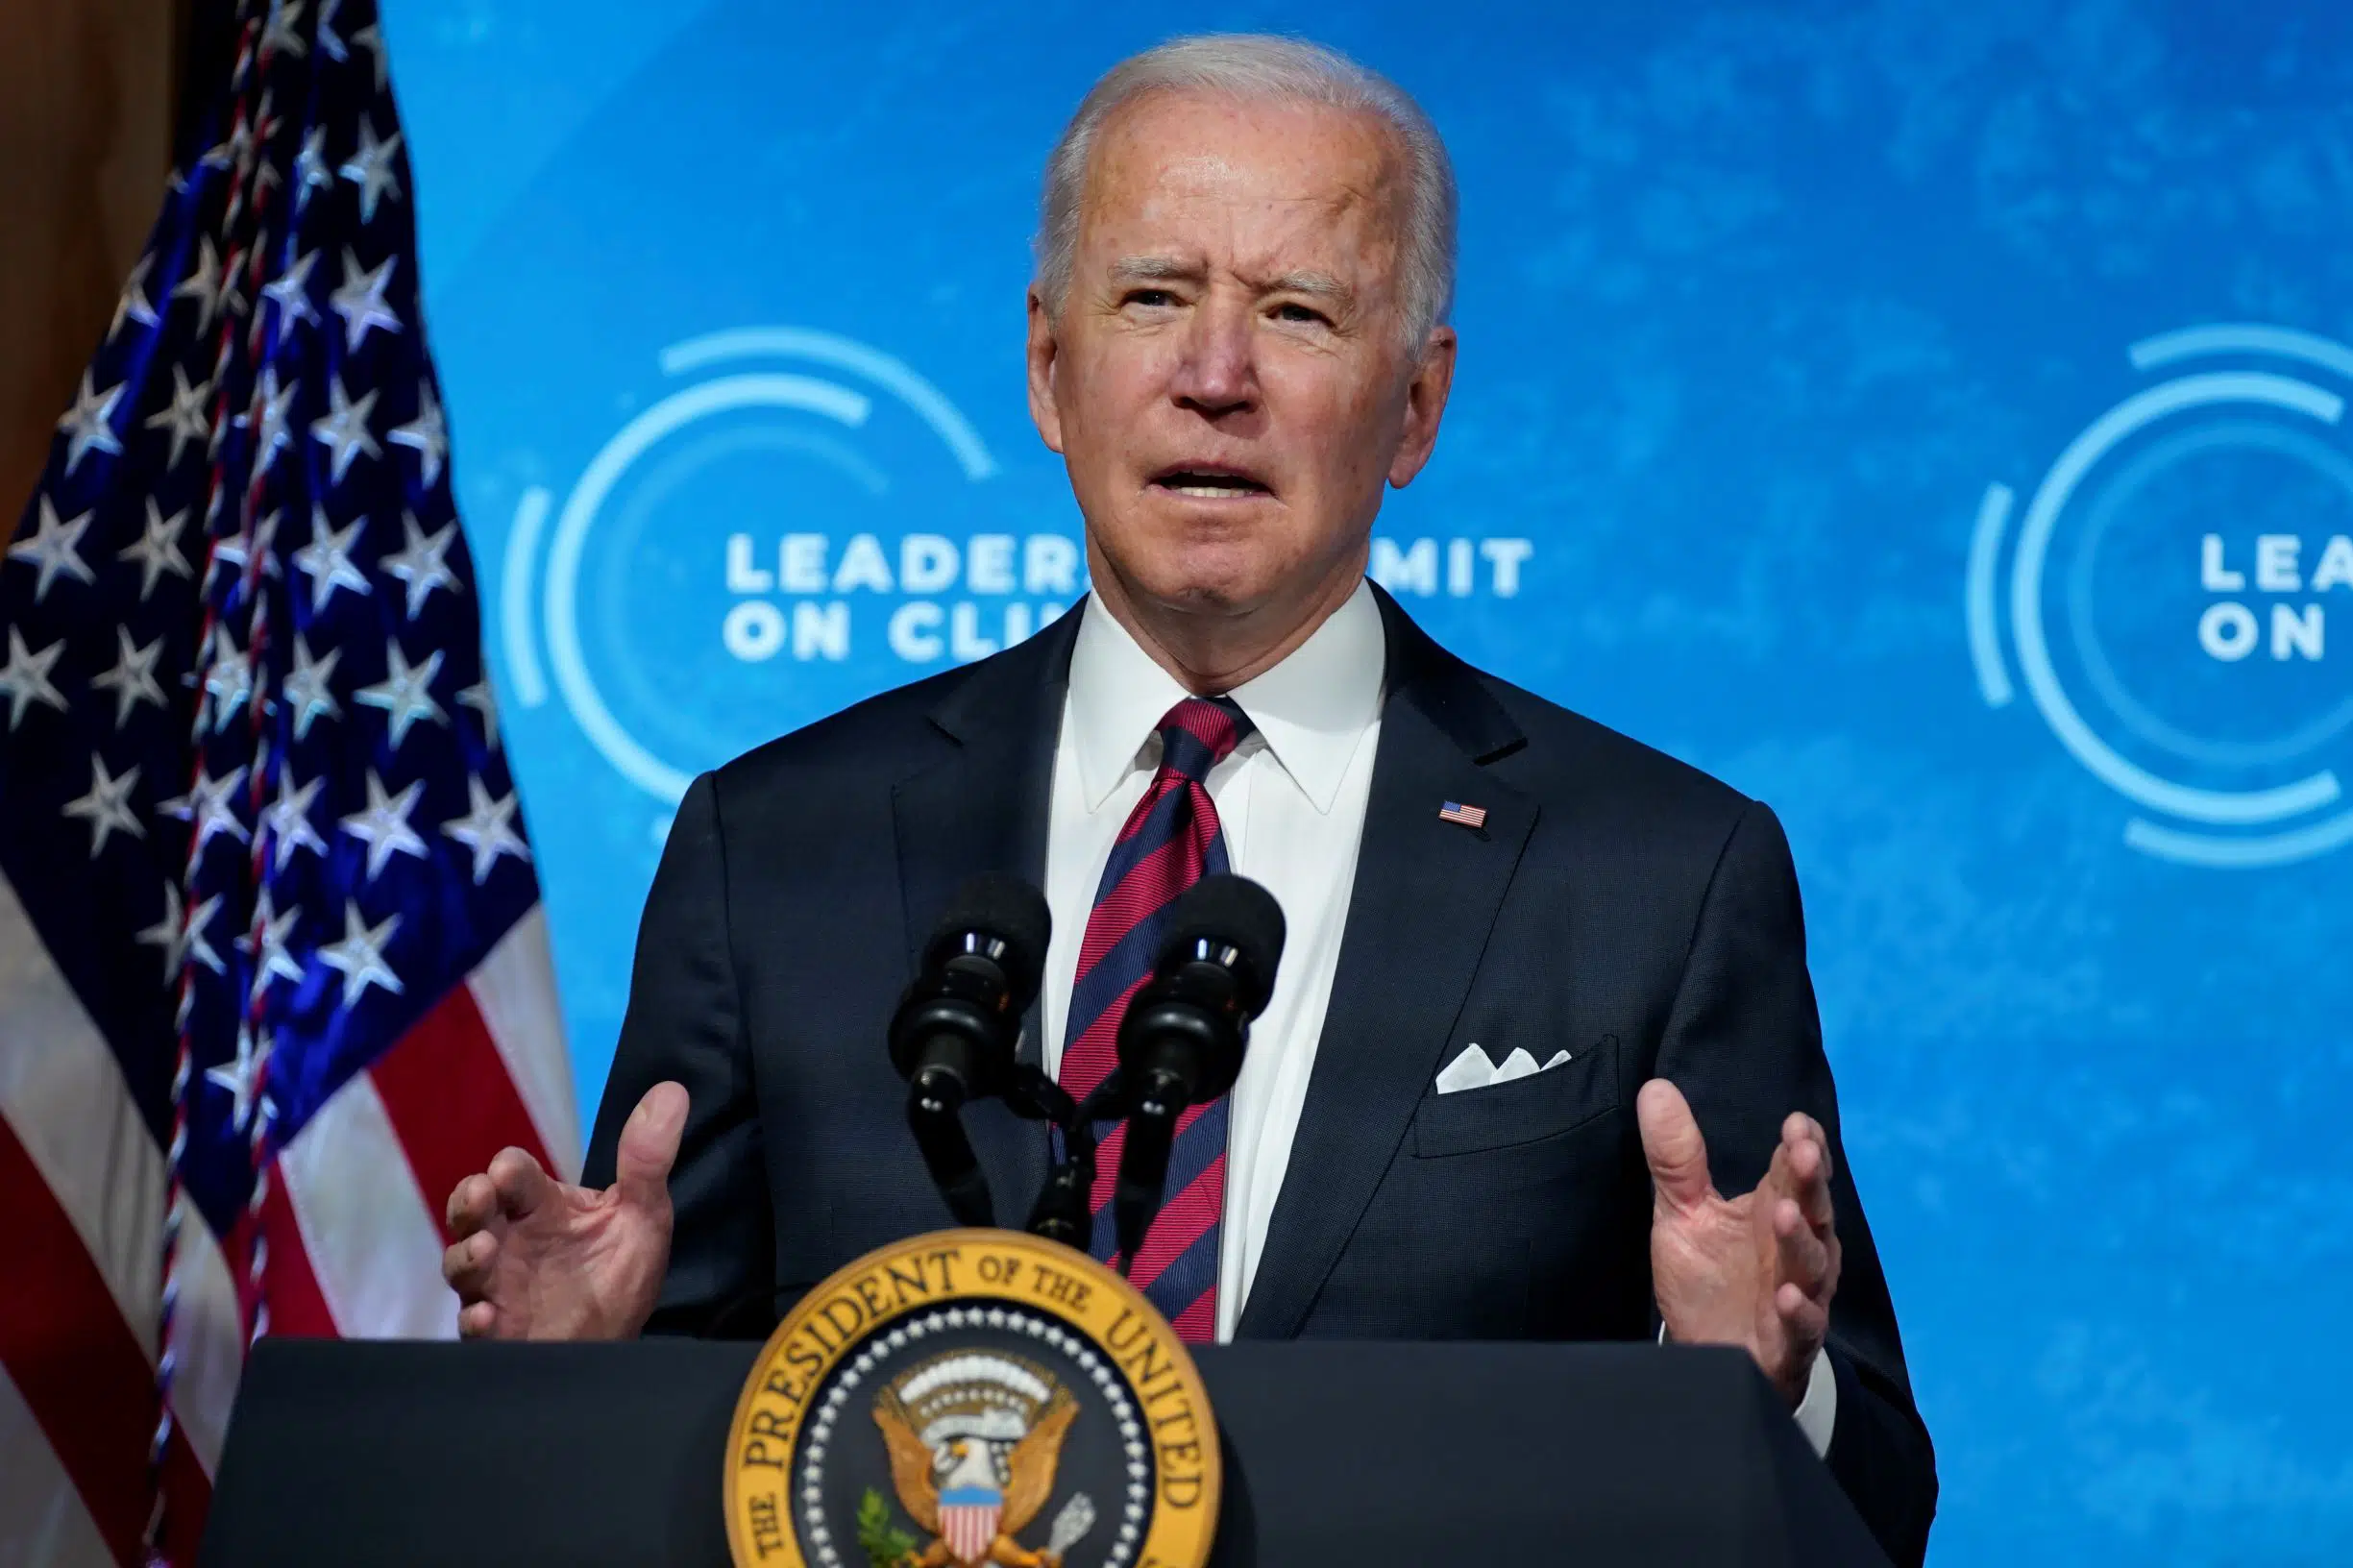 Biden Aims For U.S. ‘Leadership’ On Climate, Announces Reduction in Emissions